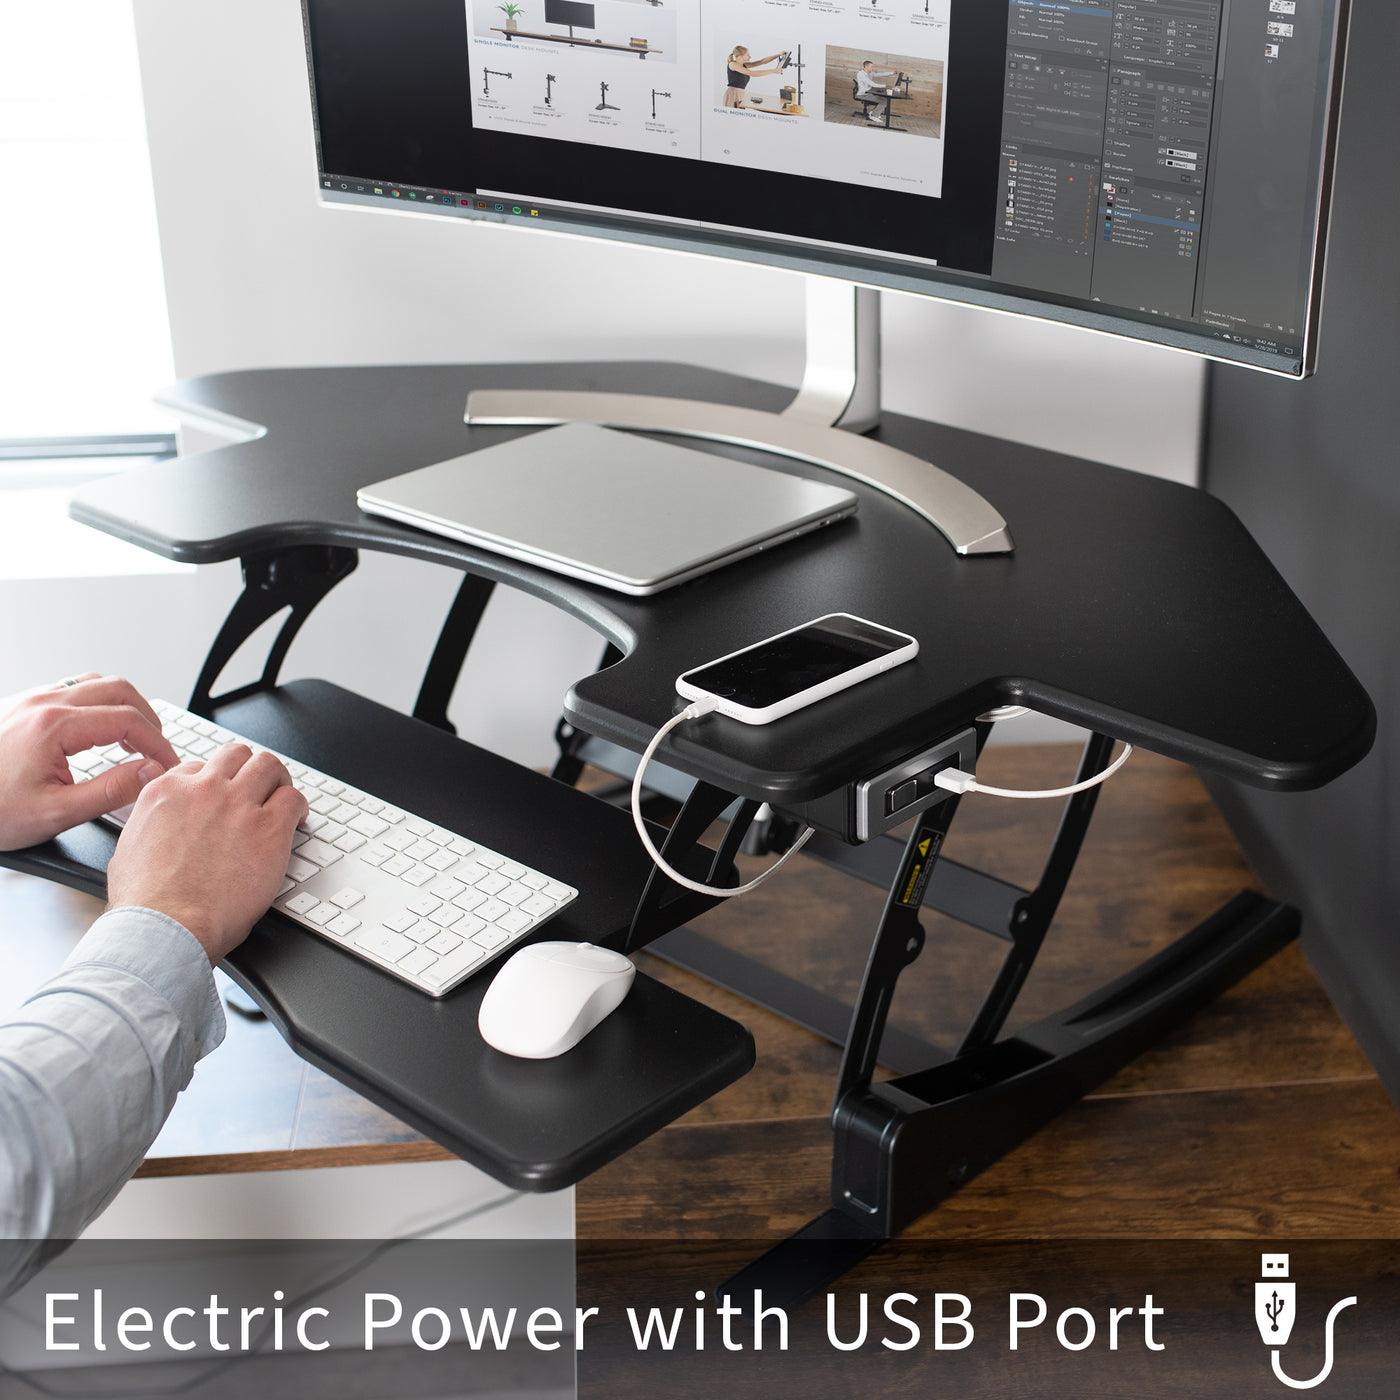 Standing Desk Converter – VIVO - desk solutions, screen mounting, and more